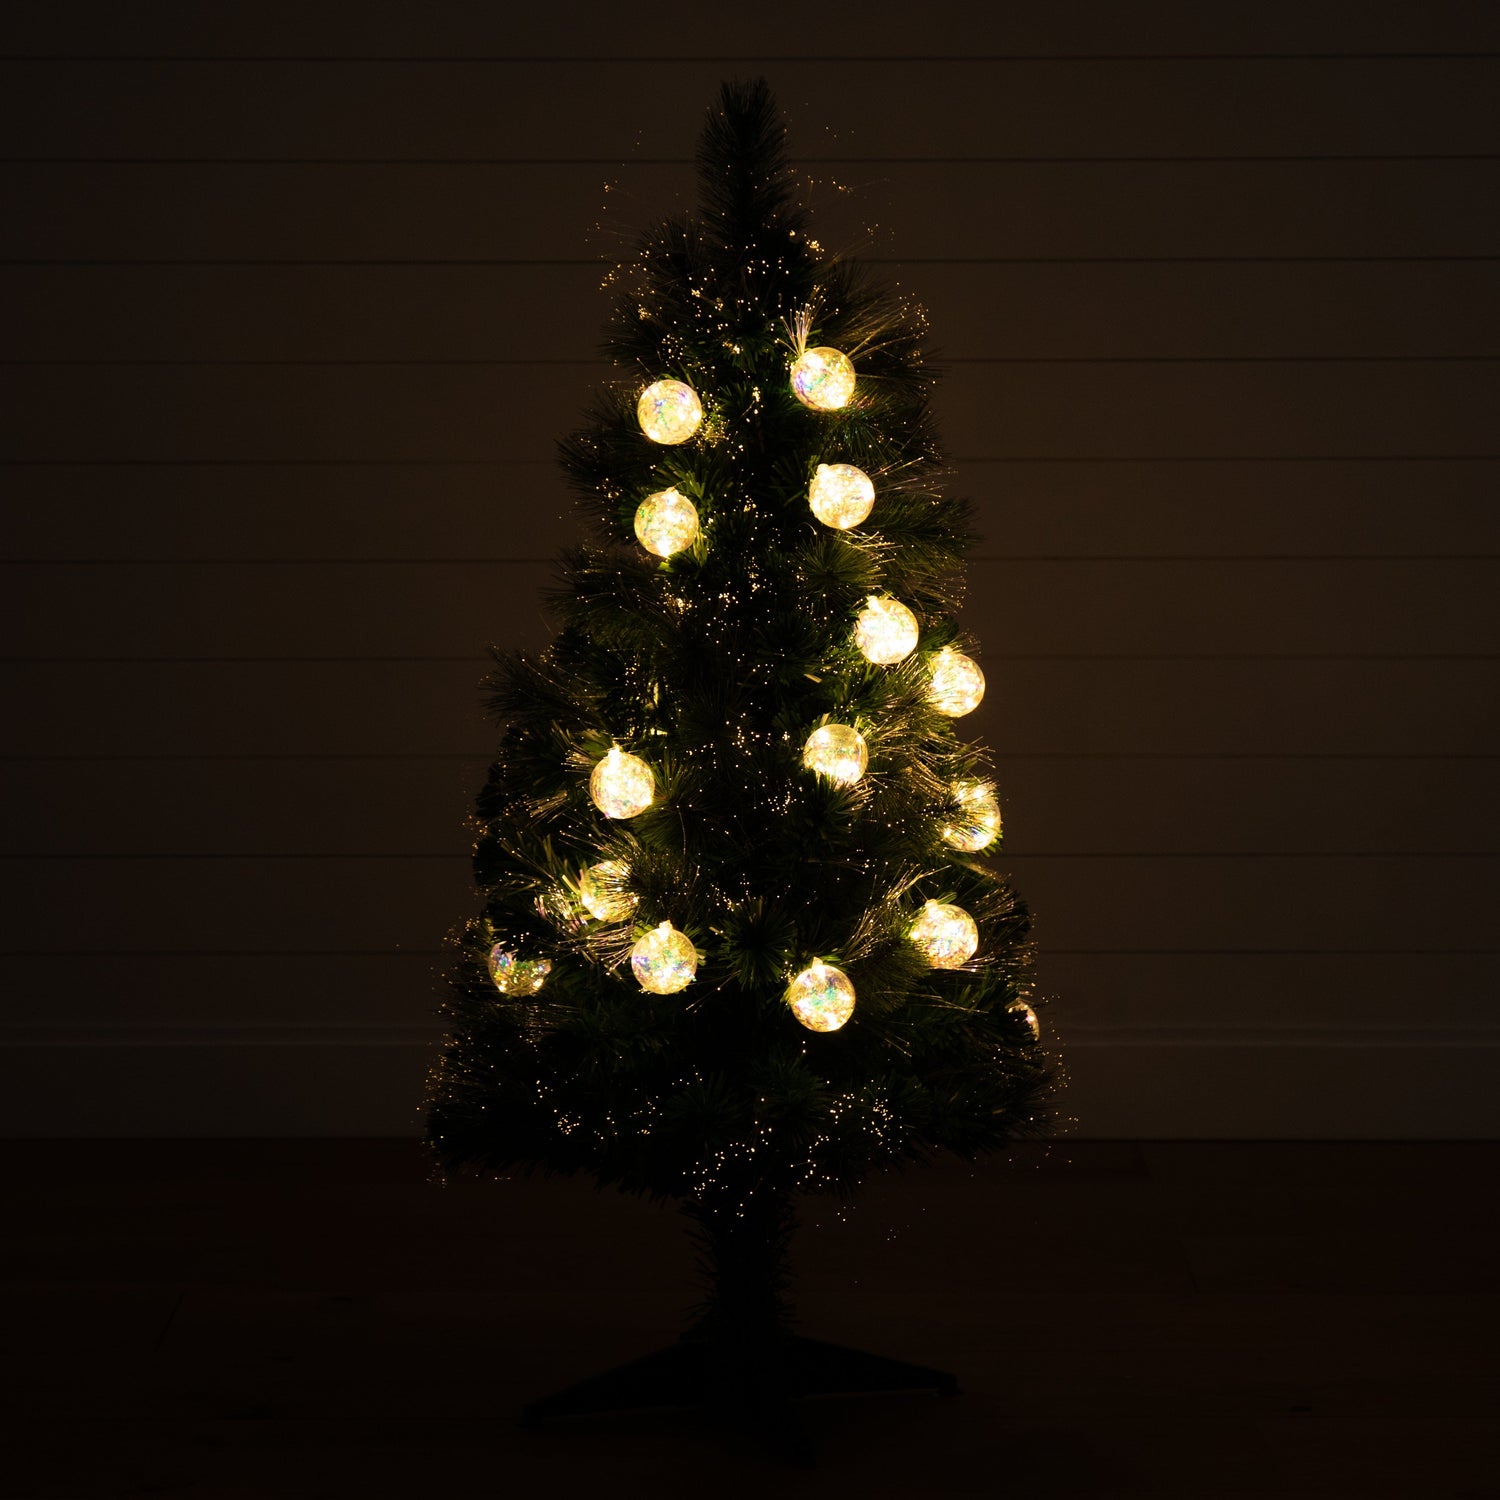 4' Pre-Lit Fiber Optic Artificial Christmas Tree with Mixed Tips and 37 LED Warm White Lights